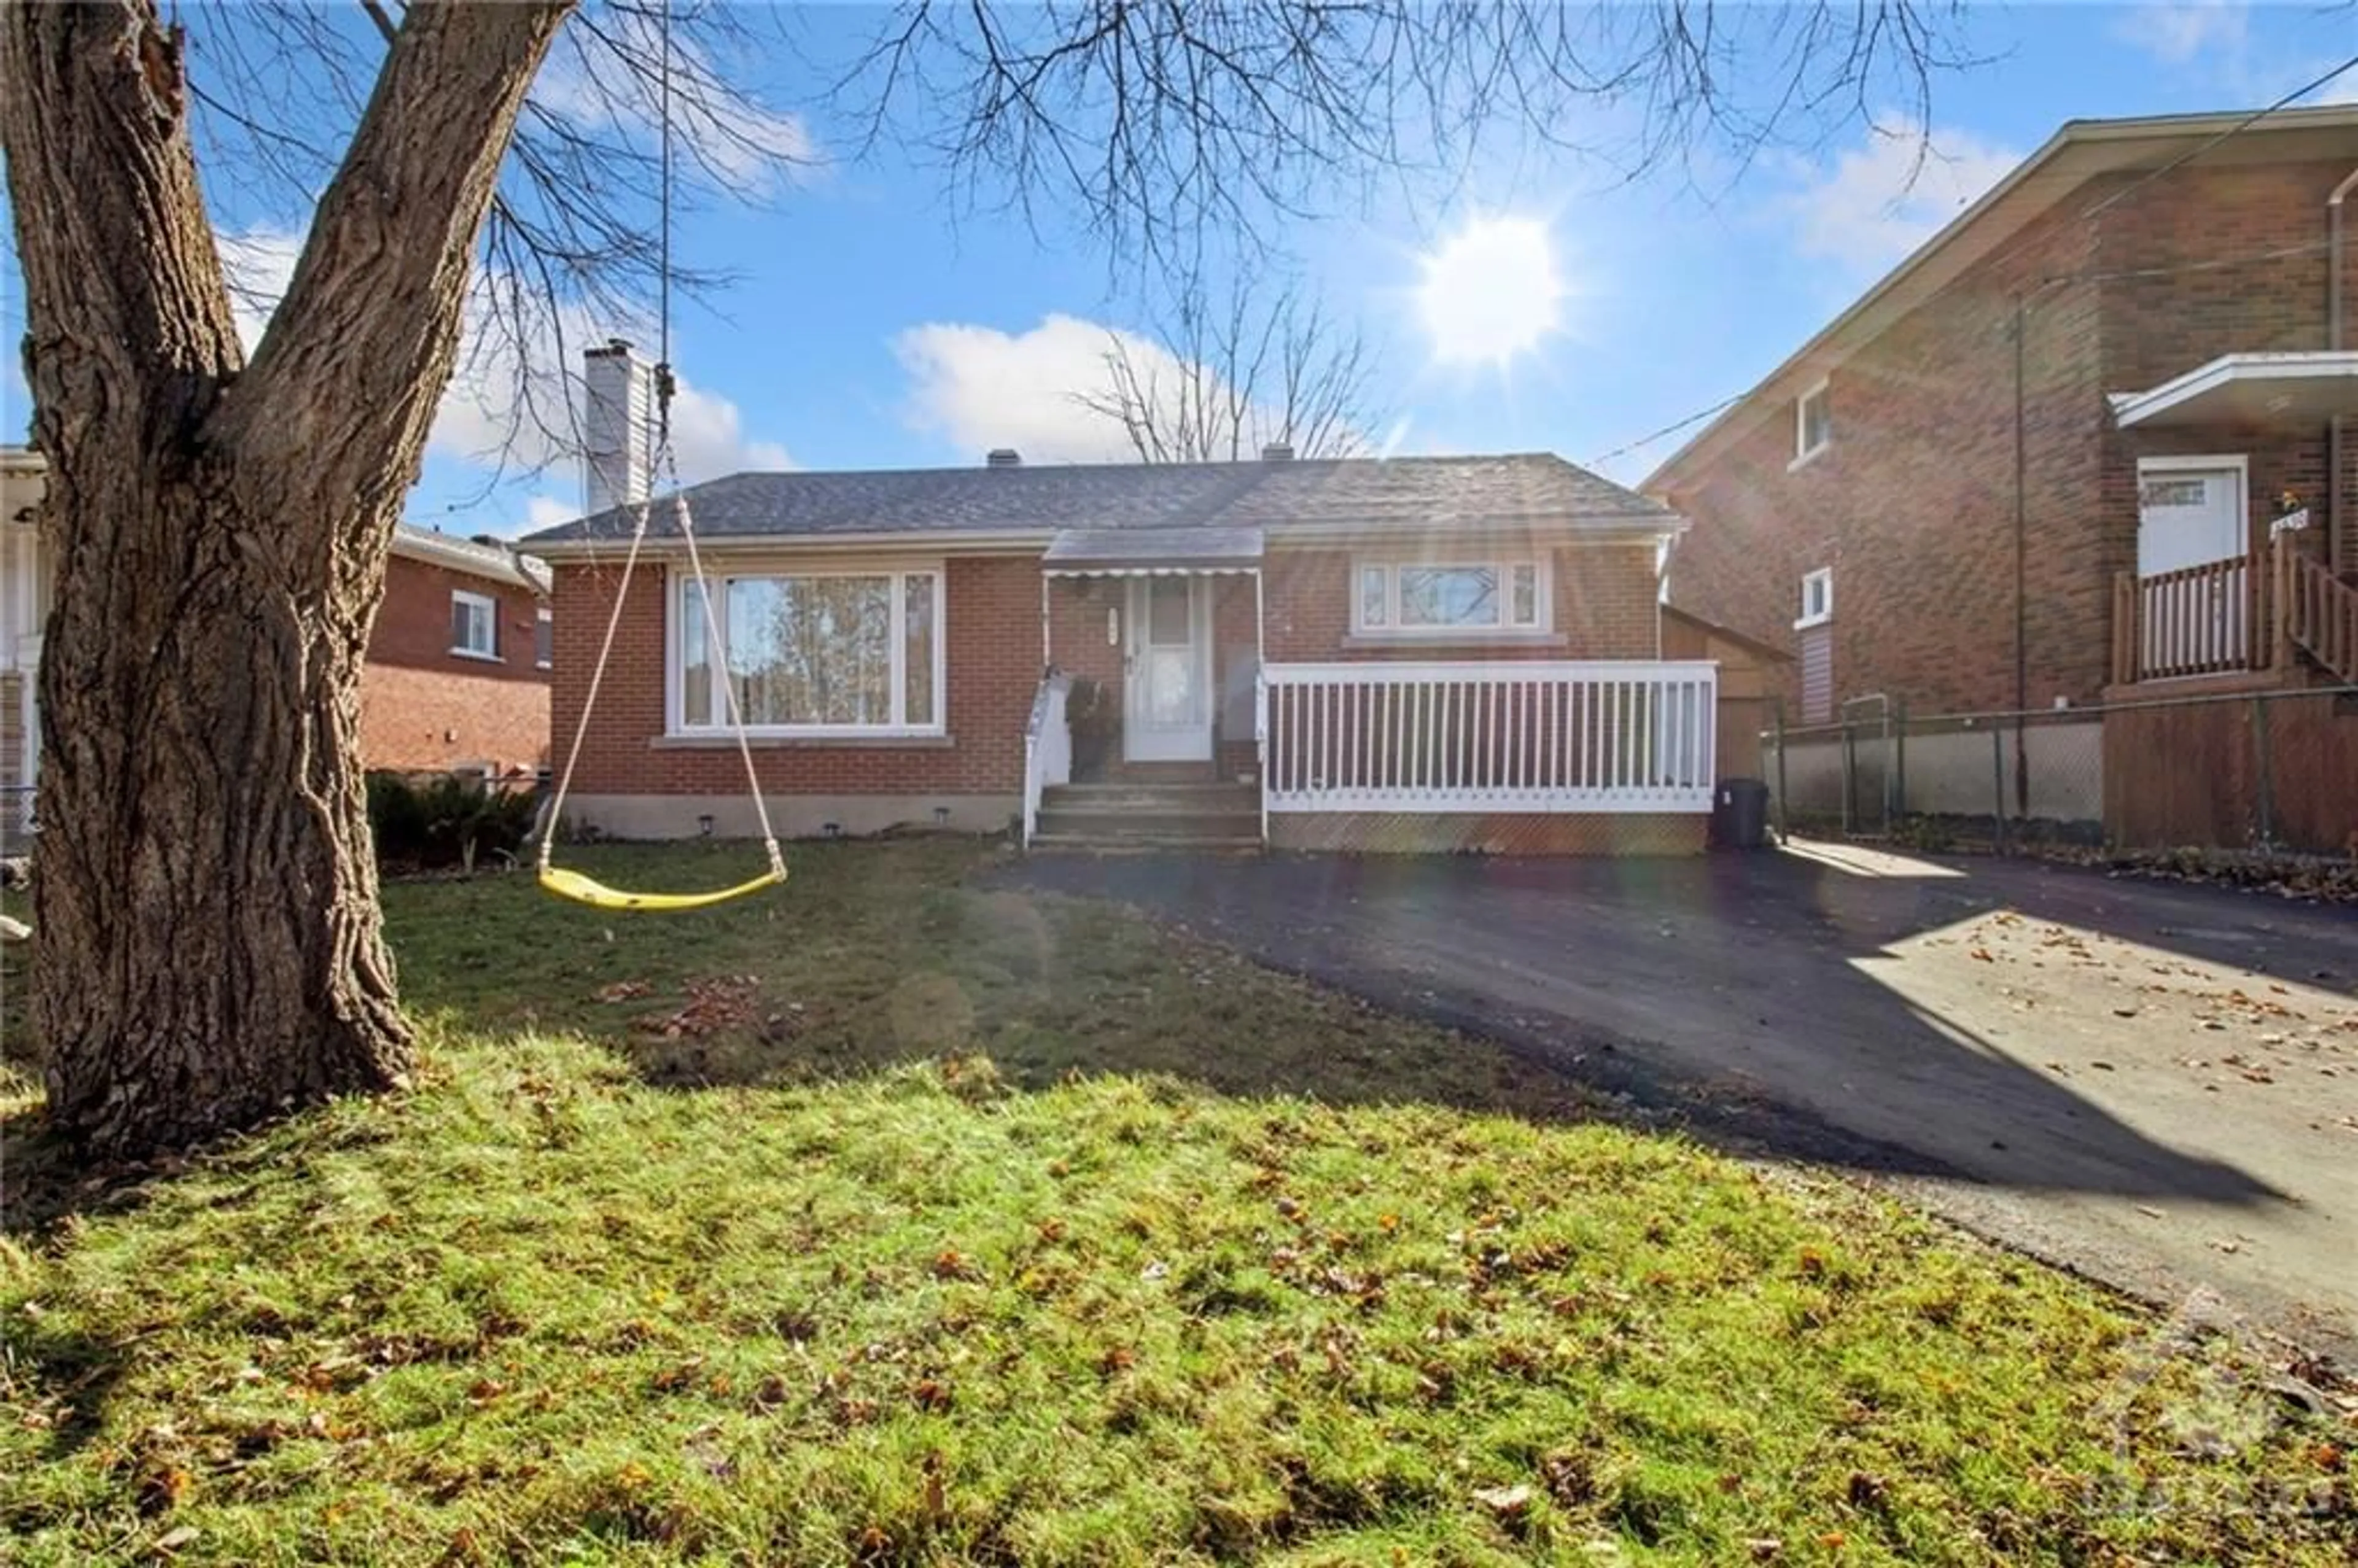 Home with brick exterior material for 1508 CHATELAIN Ave, Ottawa Ontario K1Z 8B4